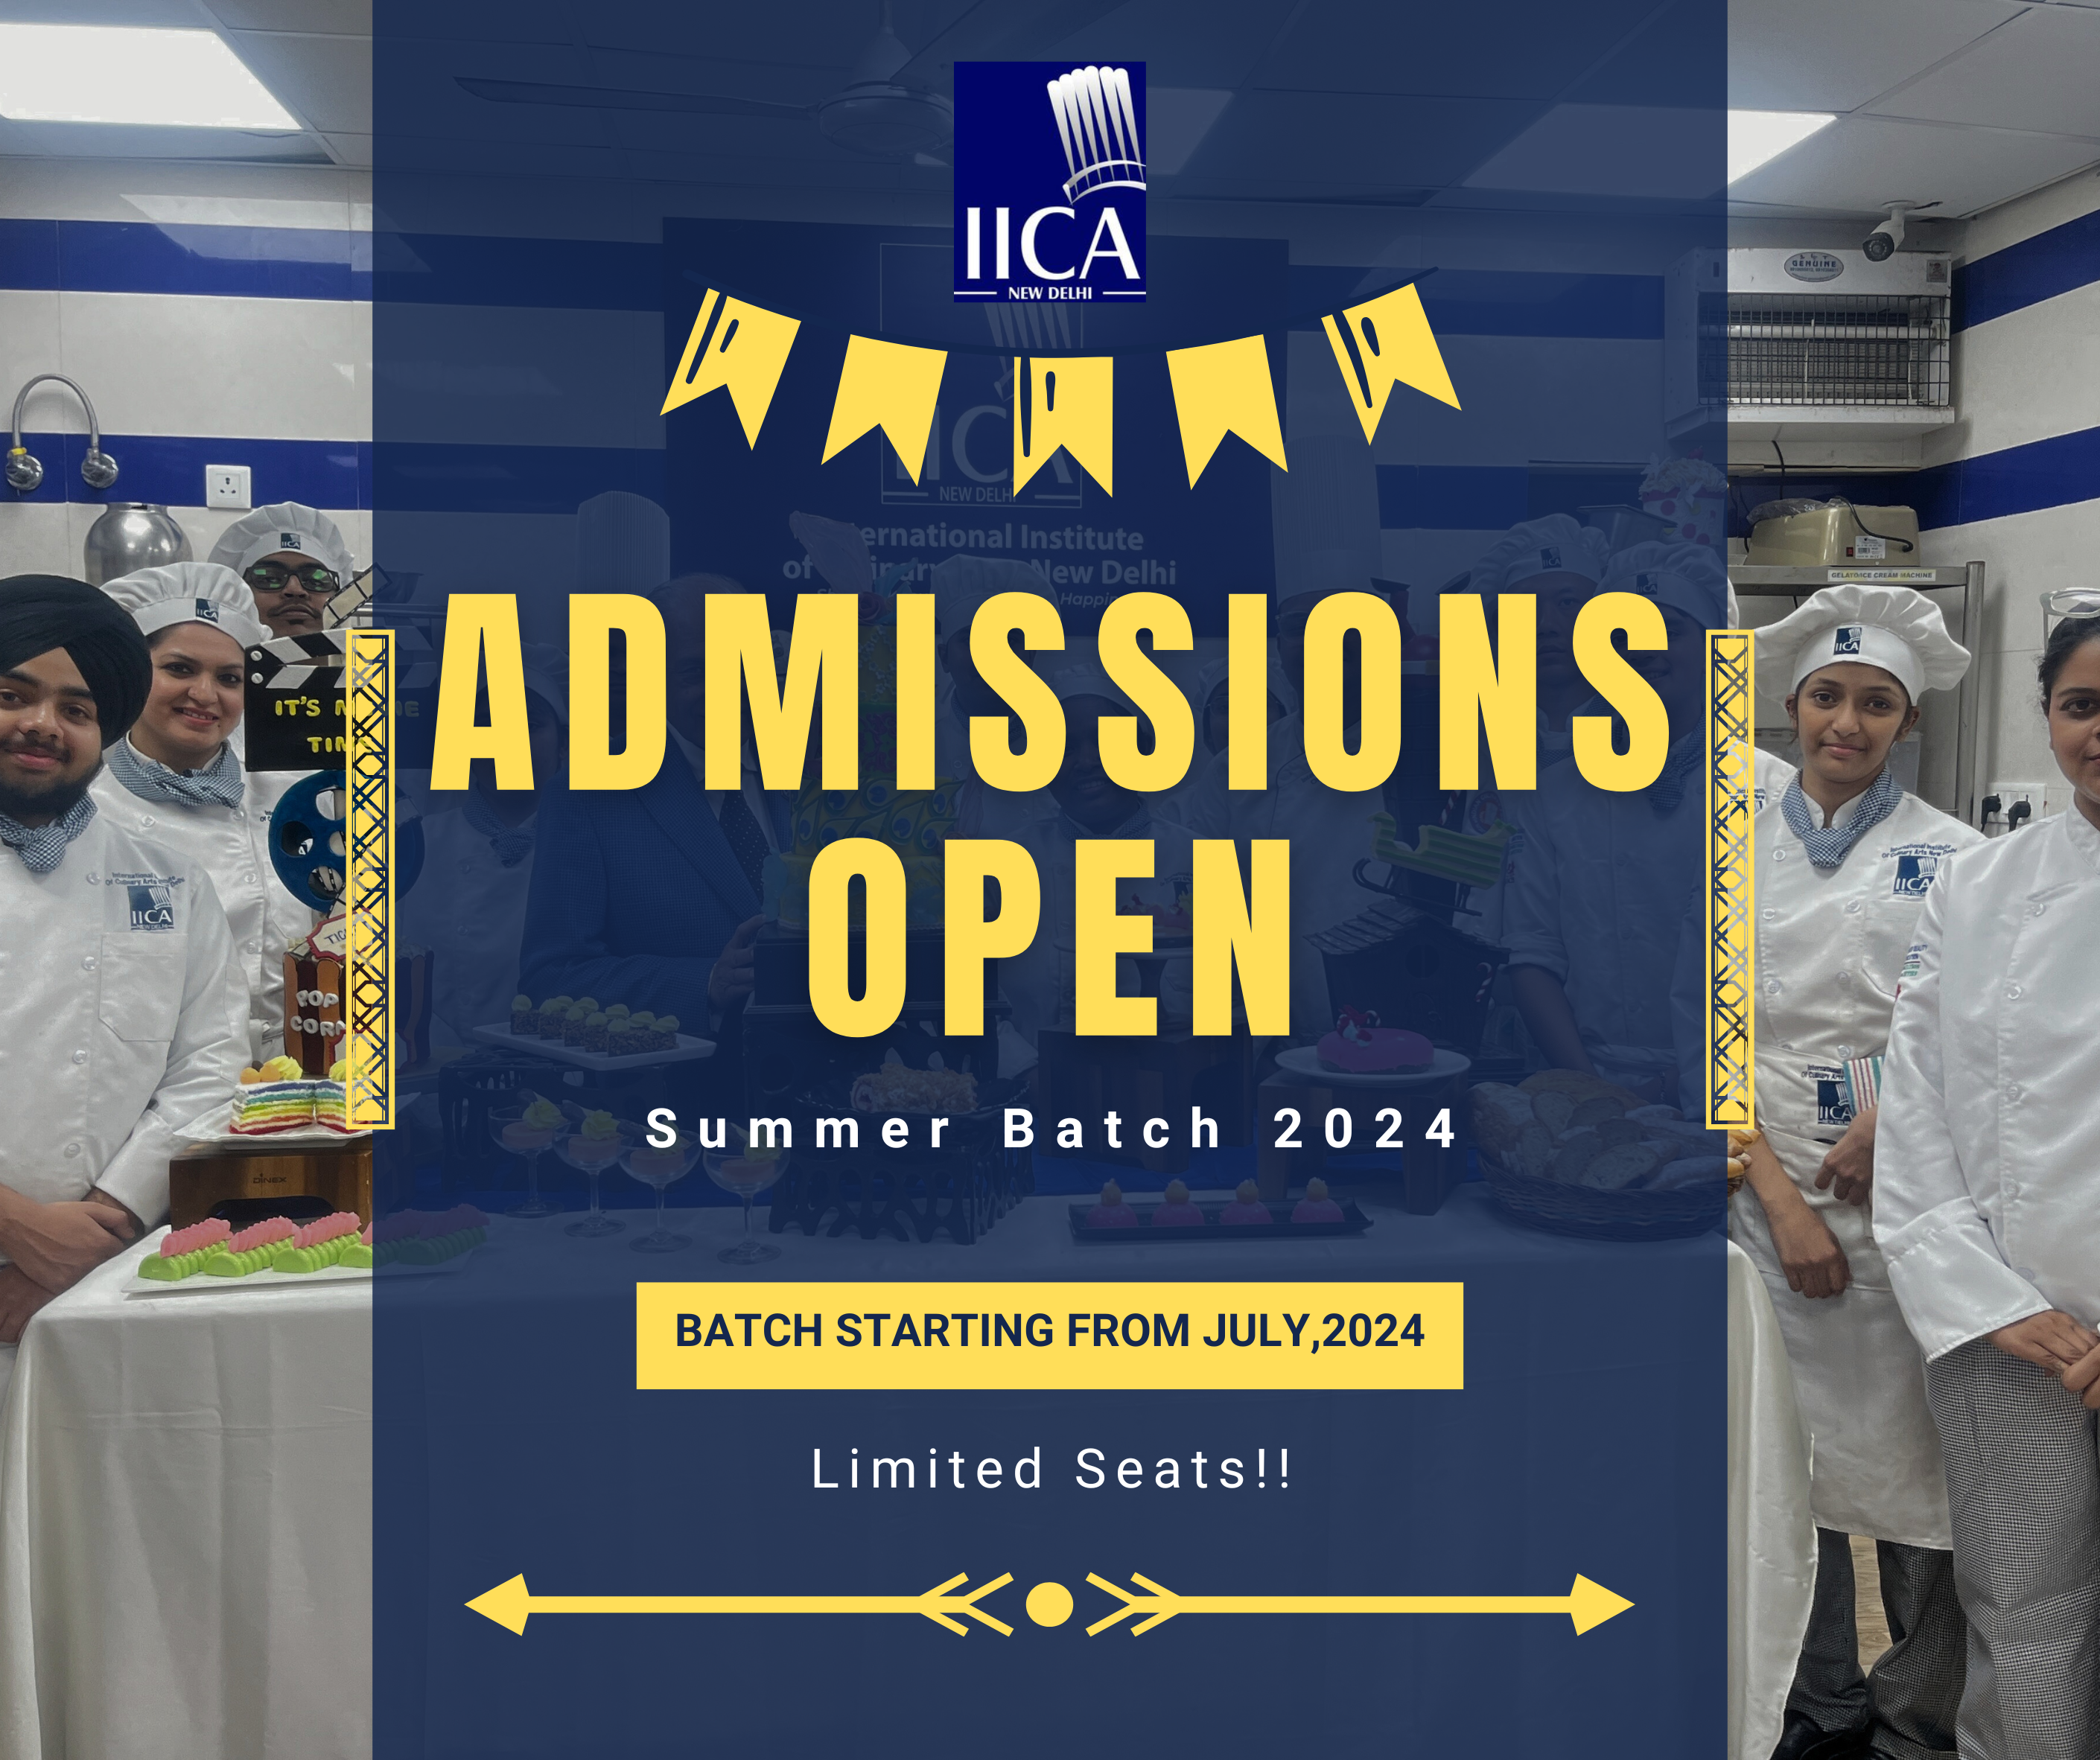 Hurry Up!! Limited Seats, Admissions open for Summer Batch 2024